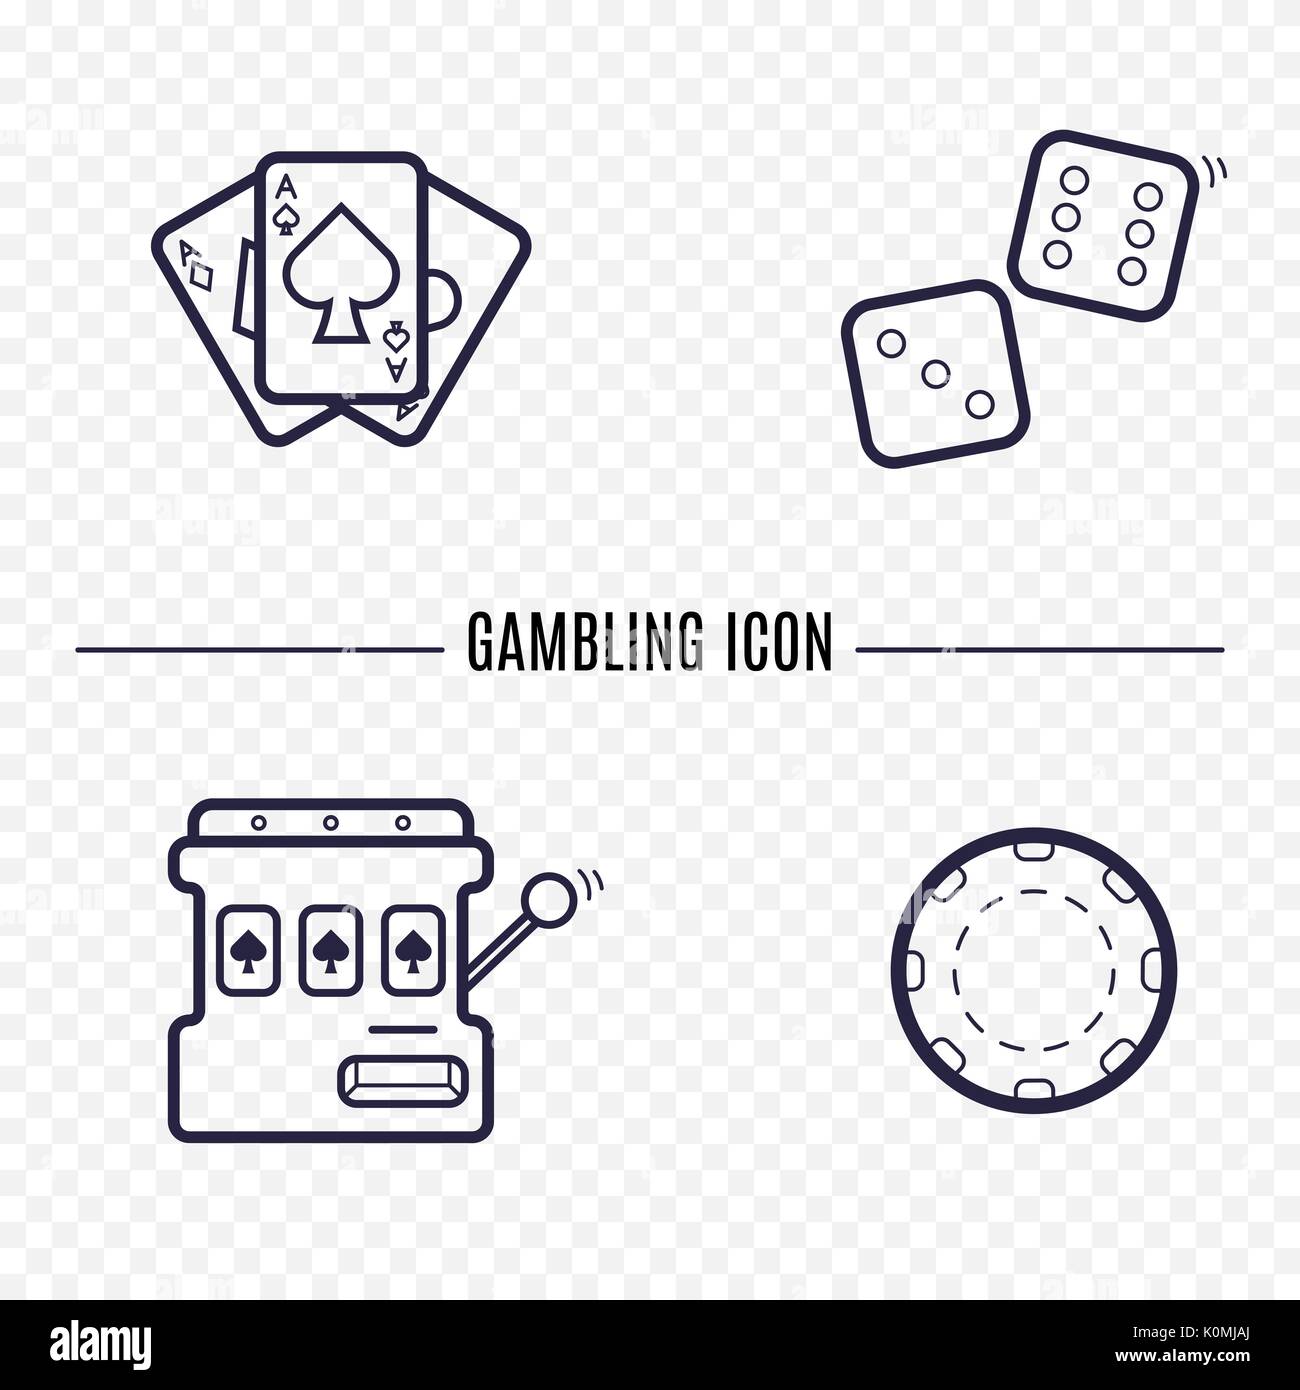 Gambling simple line icon. Card, dice, casino chip, slot mashine thin linear signs. Outline casino game simple concept for websites, infographic, mobile applications. Stock Vector